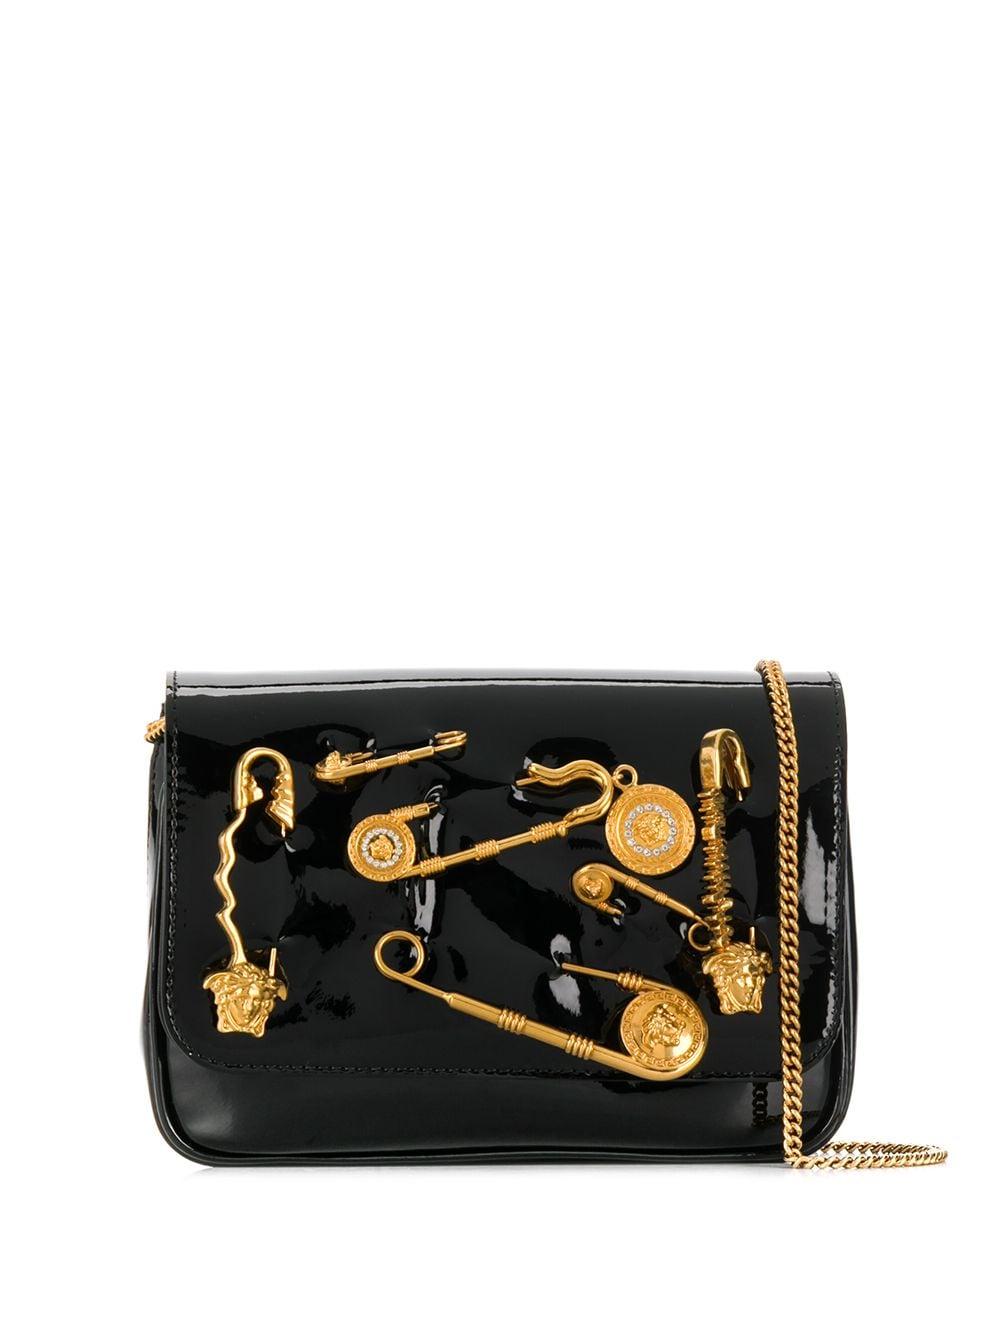 Versace Safety Pin Patent Leather Crossbody Bag in Black